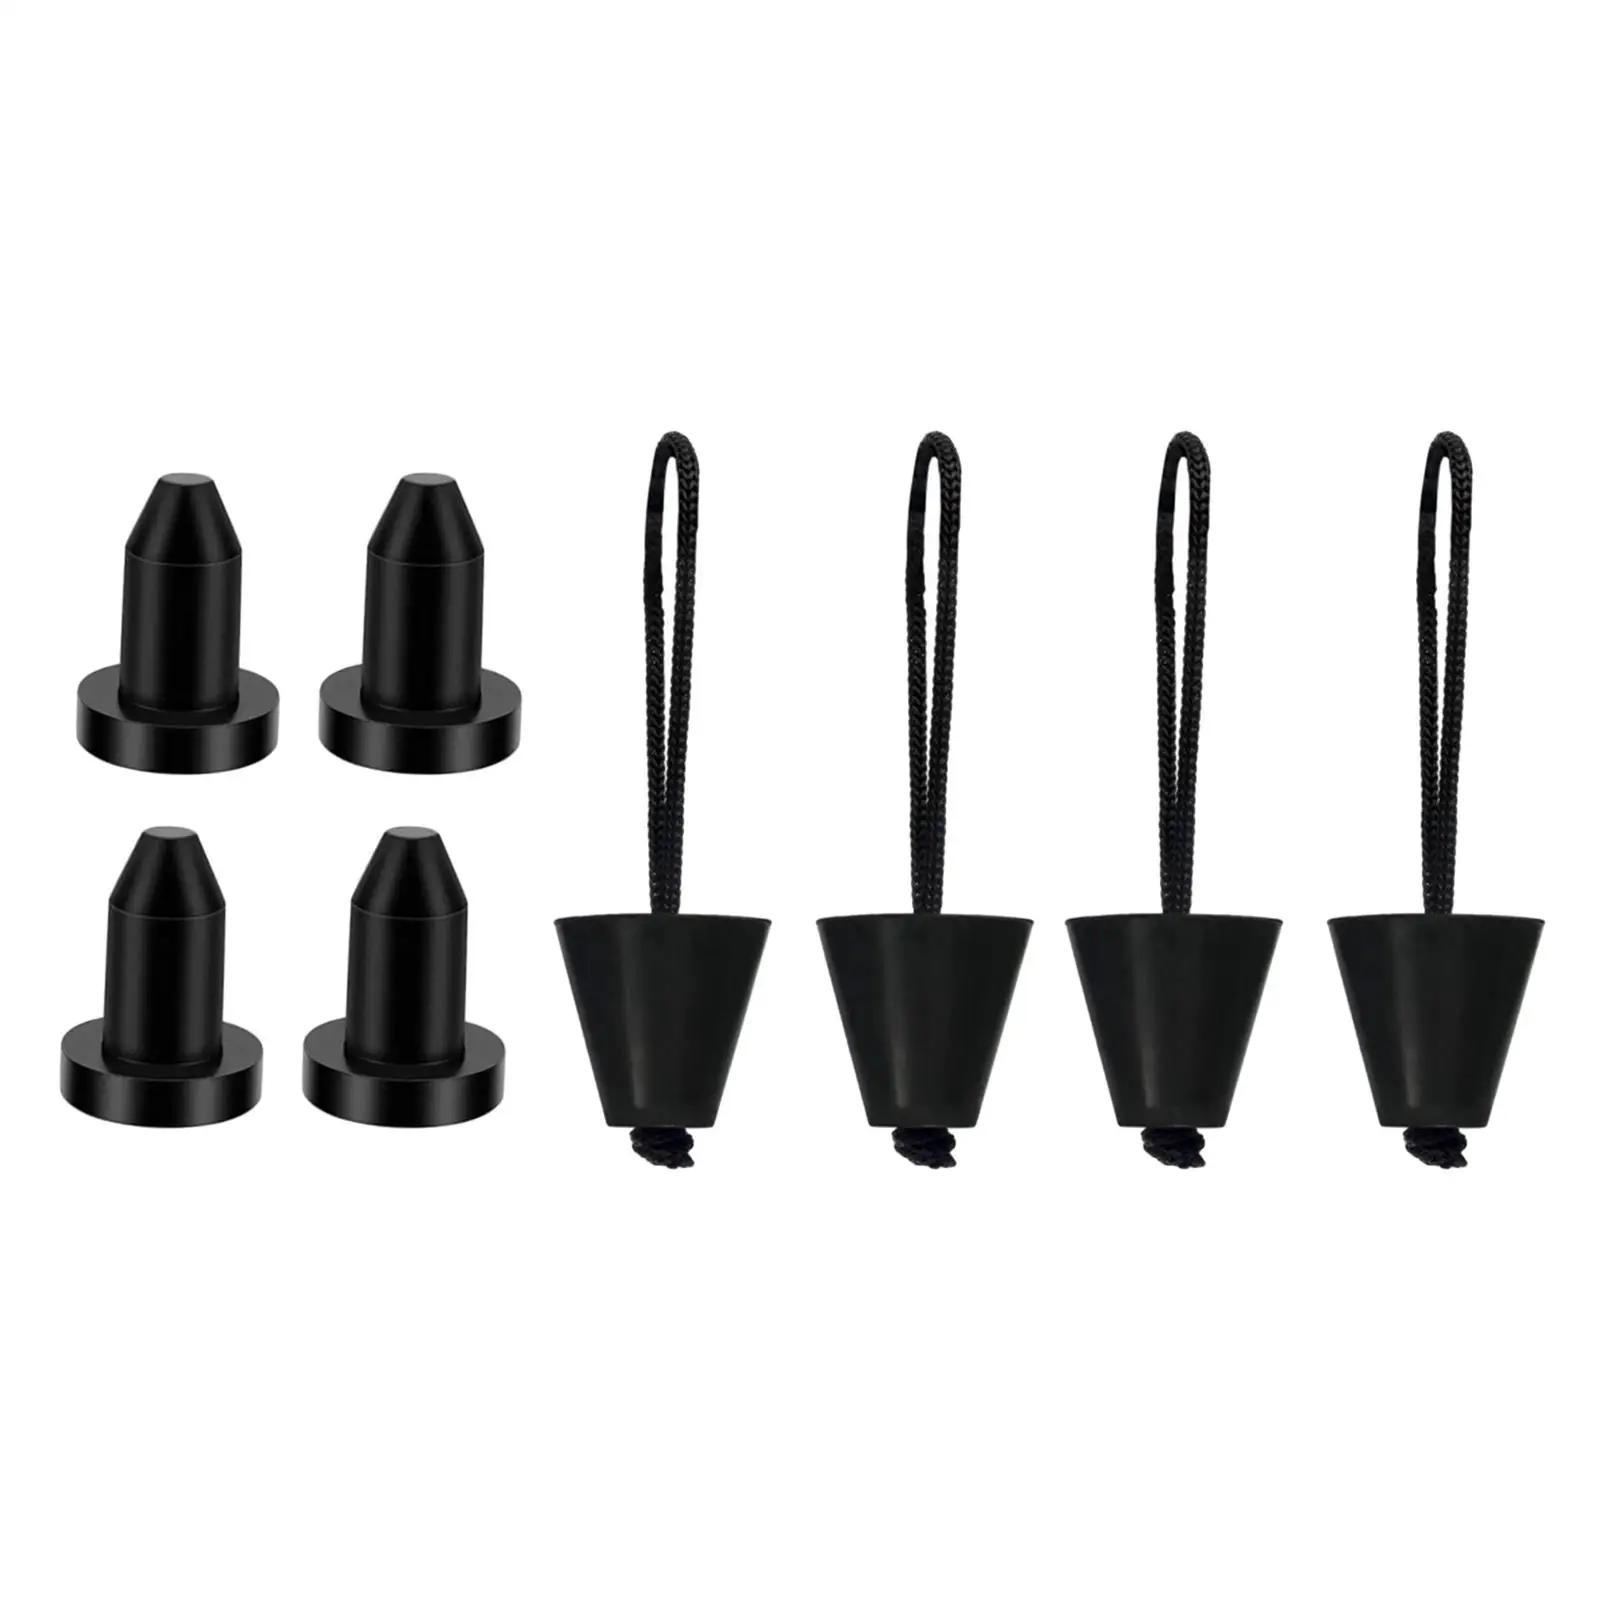 8Pcs Kayak Scupper Plug Kit Direct Replaces Sit on Top Silicone Drain Holes Stopper Bung for Boat Dinghy Raft Yacht Water Sports